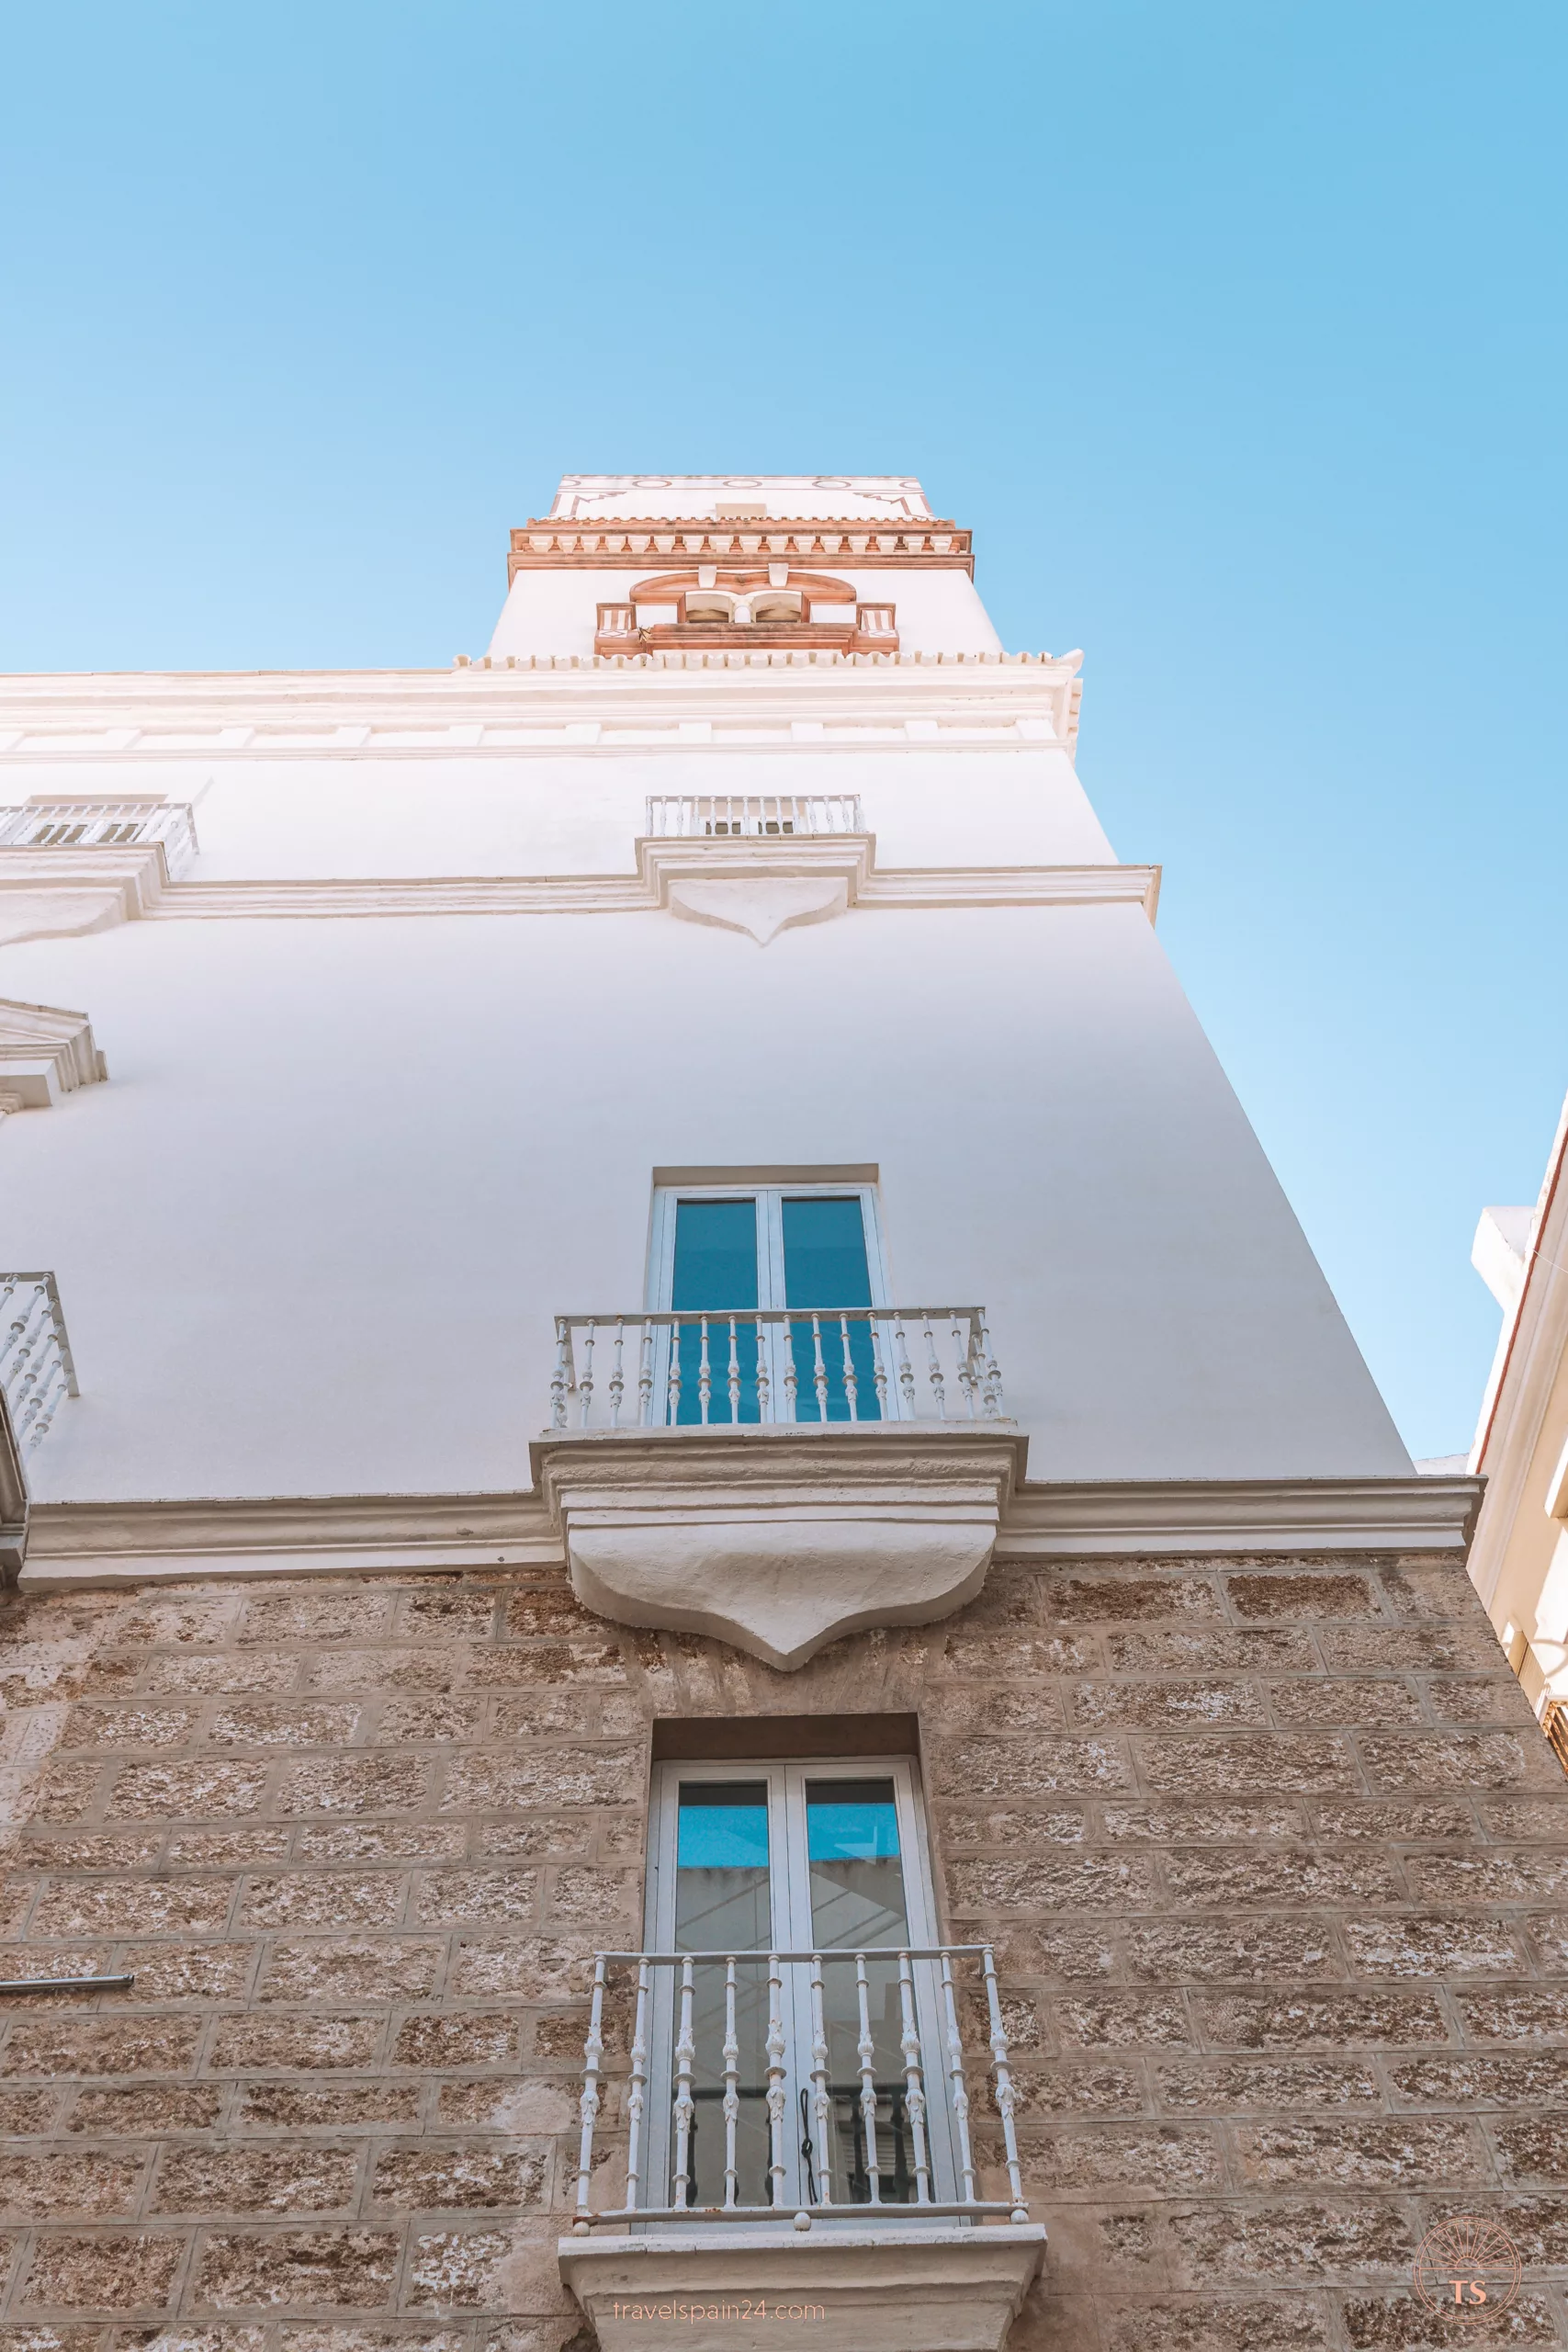 Torre de Tavira from the street in Cadiz, highlighting its prominent structure. This tower is one of the Cadiz highlights, offering historical significance and panoramic views of the city.
